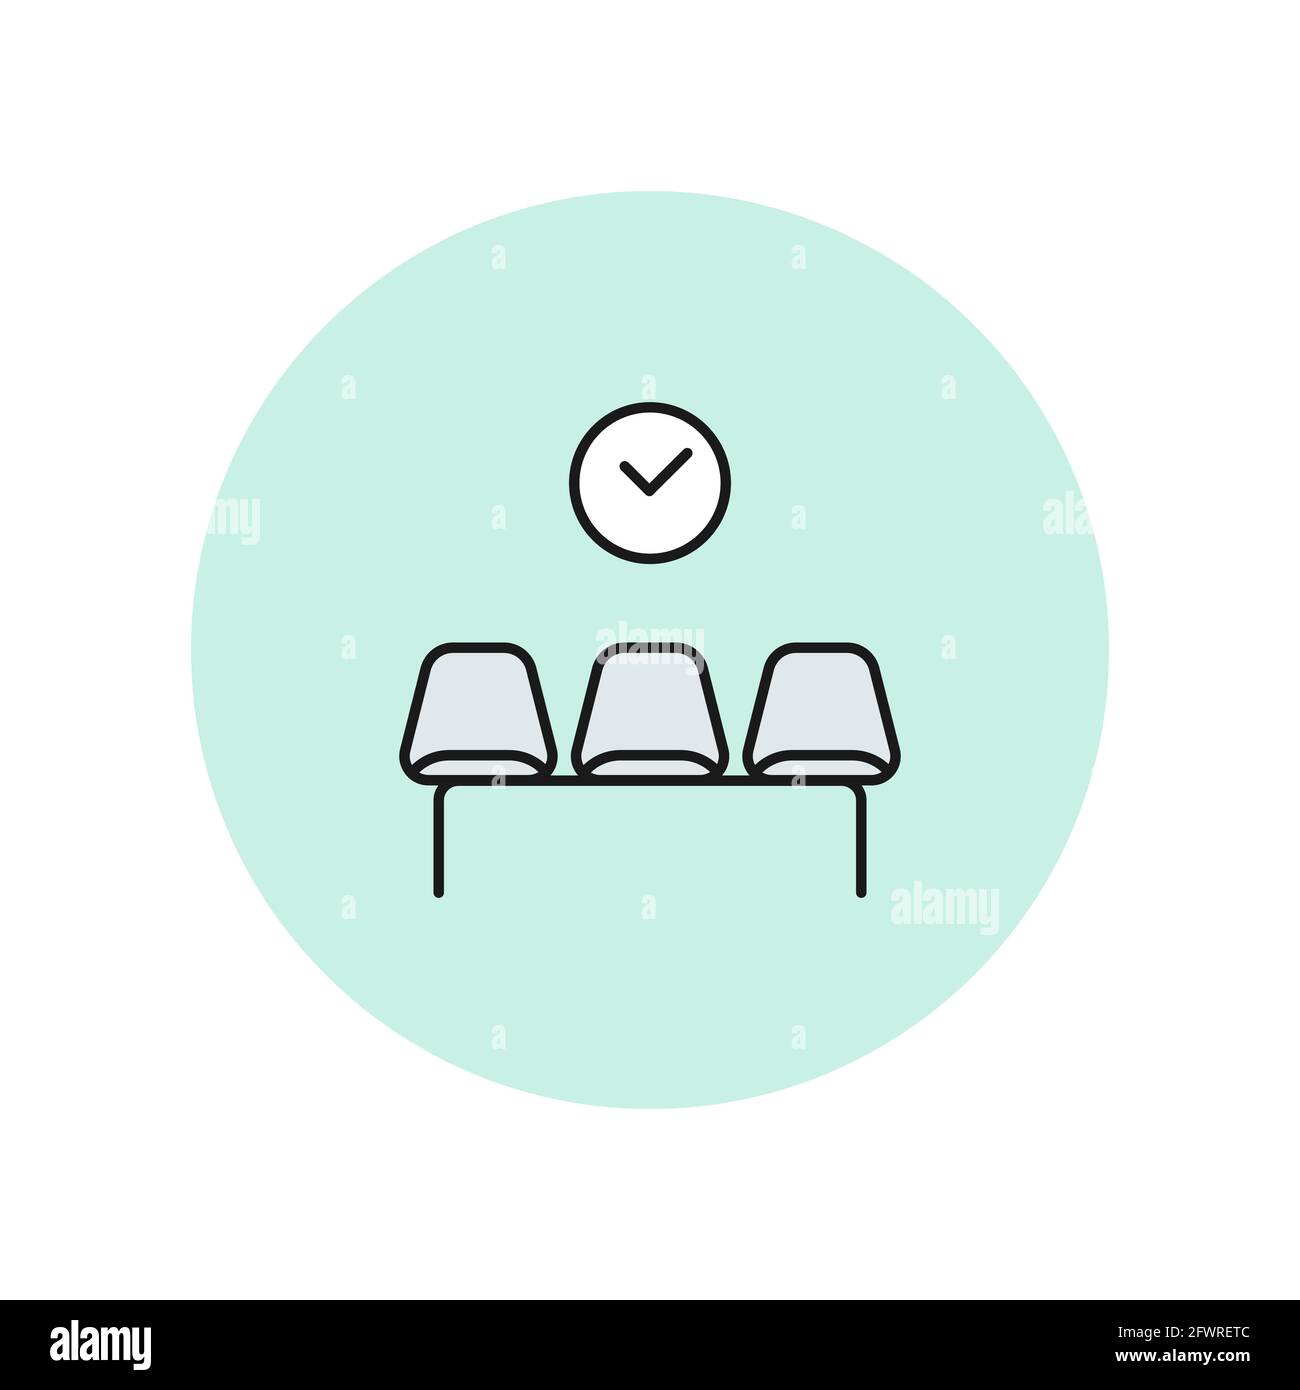 Waiting room icon. Black thick outline. Three empty chairs. A clock on the wall. Vector illustration, flat design Stock Vector